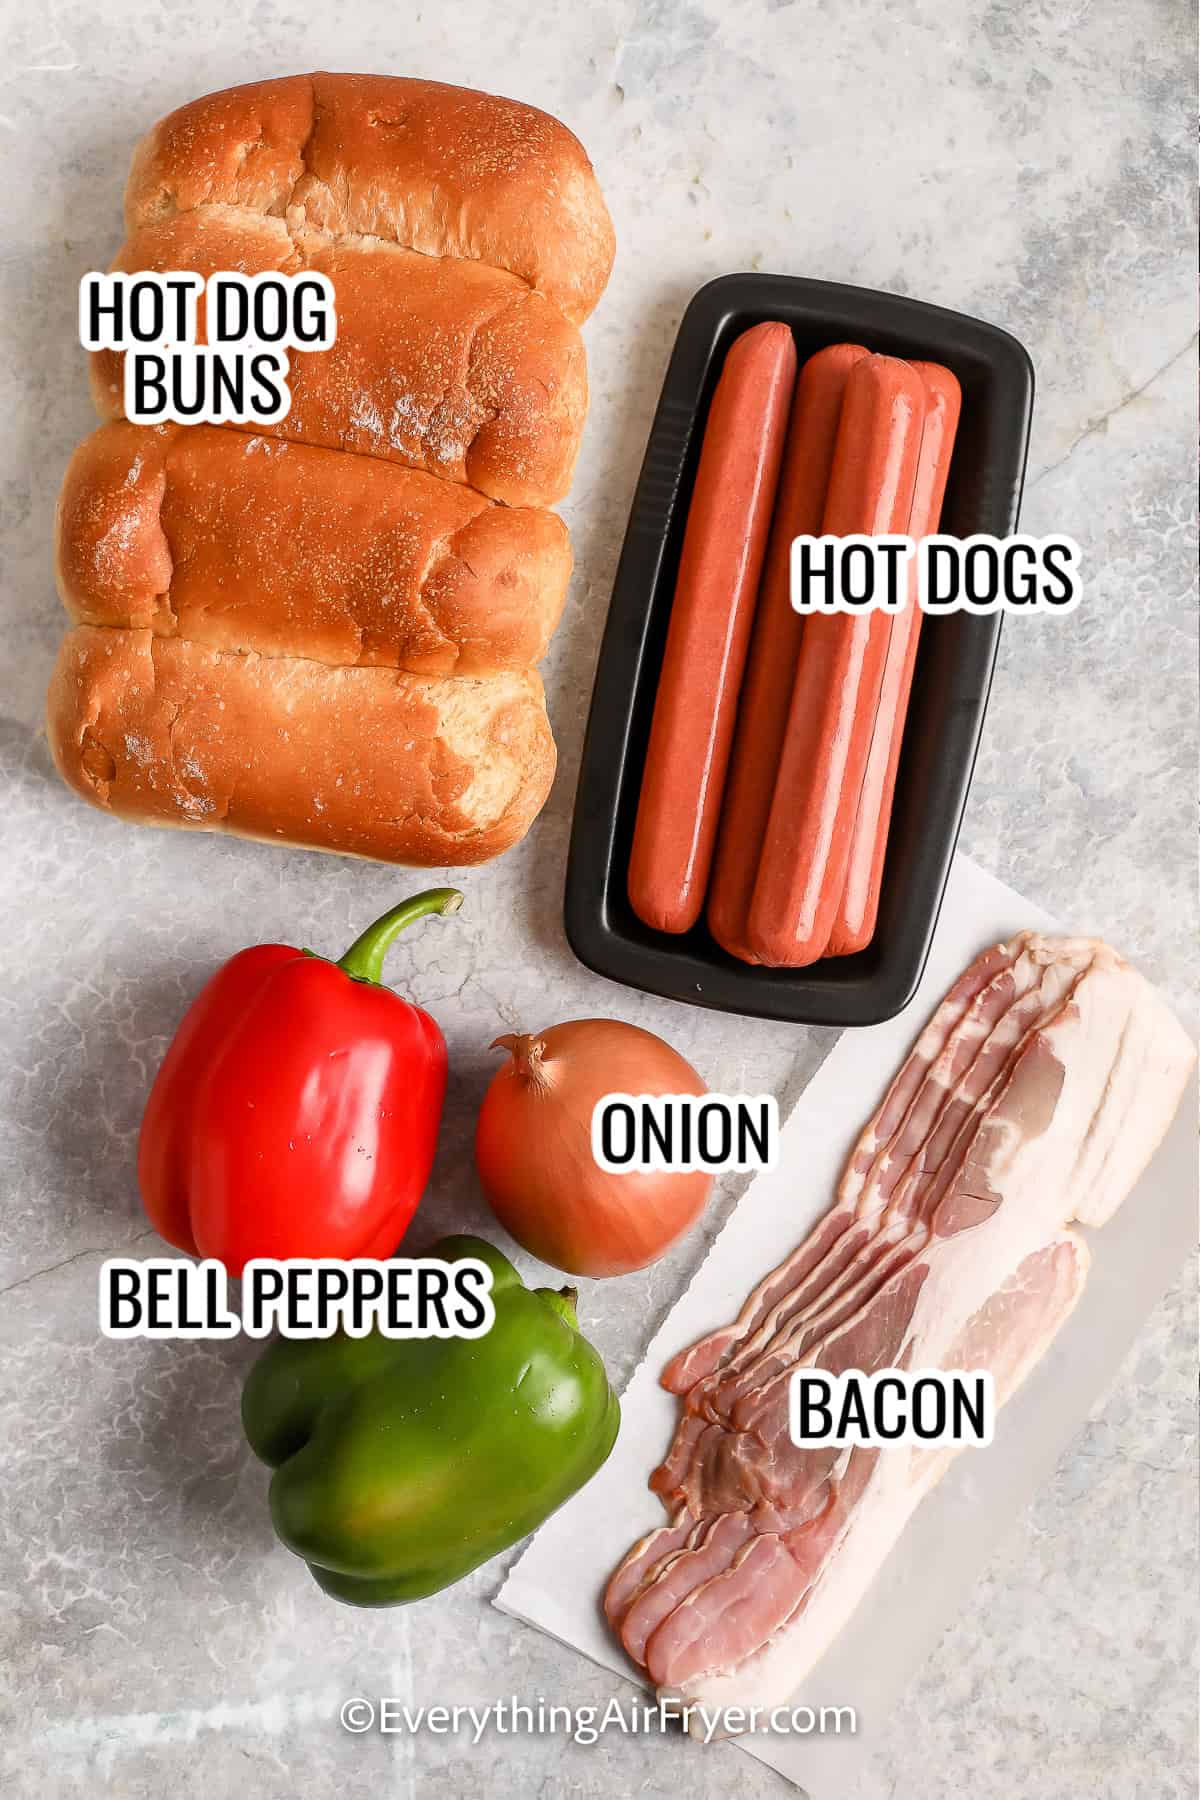 ingredients assembled to make air fryer LA hot dogs including hot dog buns, hot dogs, bell peppers, onion, and bacon